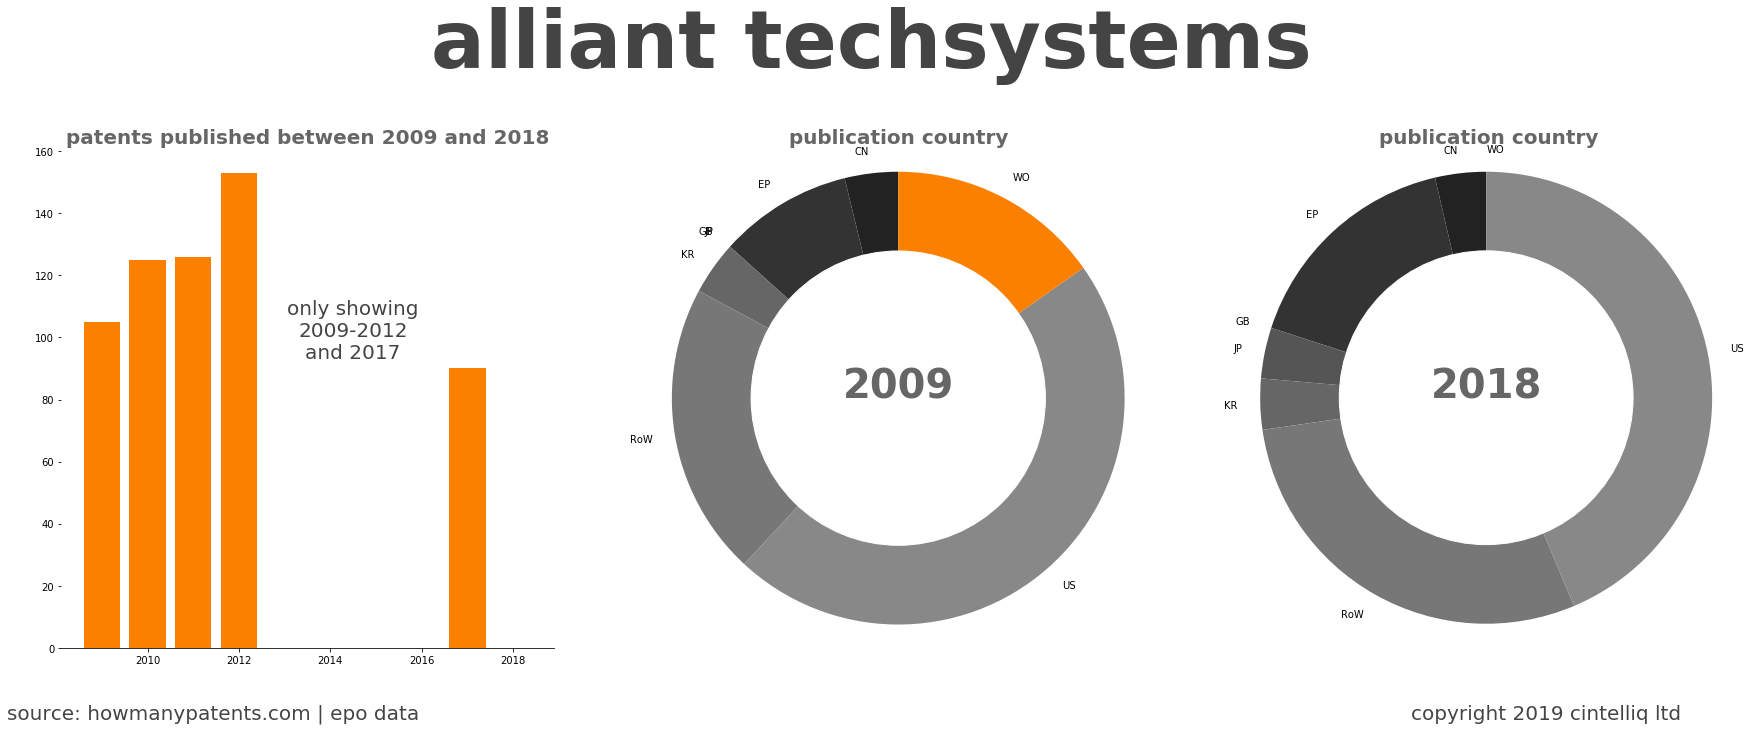 summary of patents for Alliant Techsystems